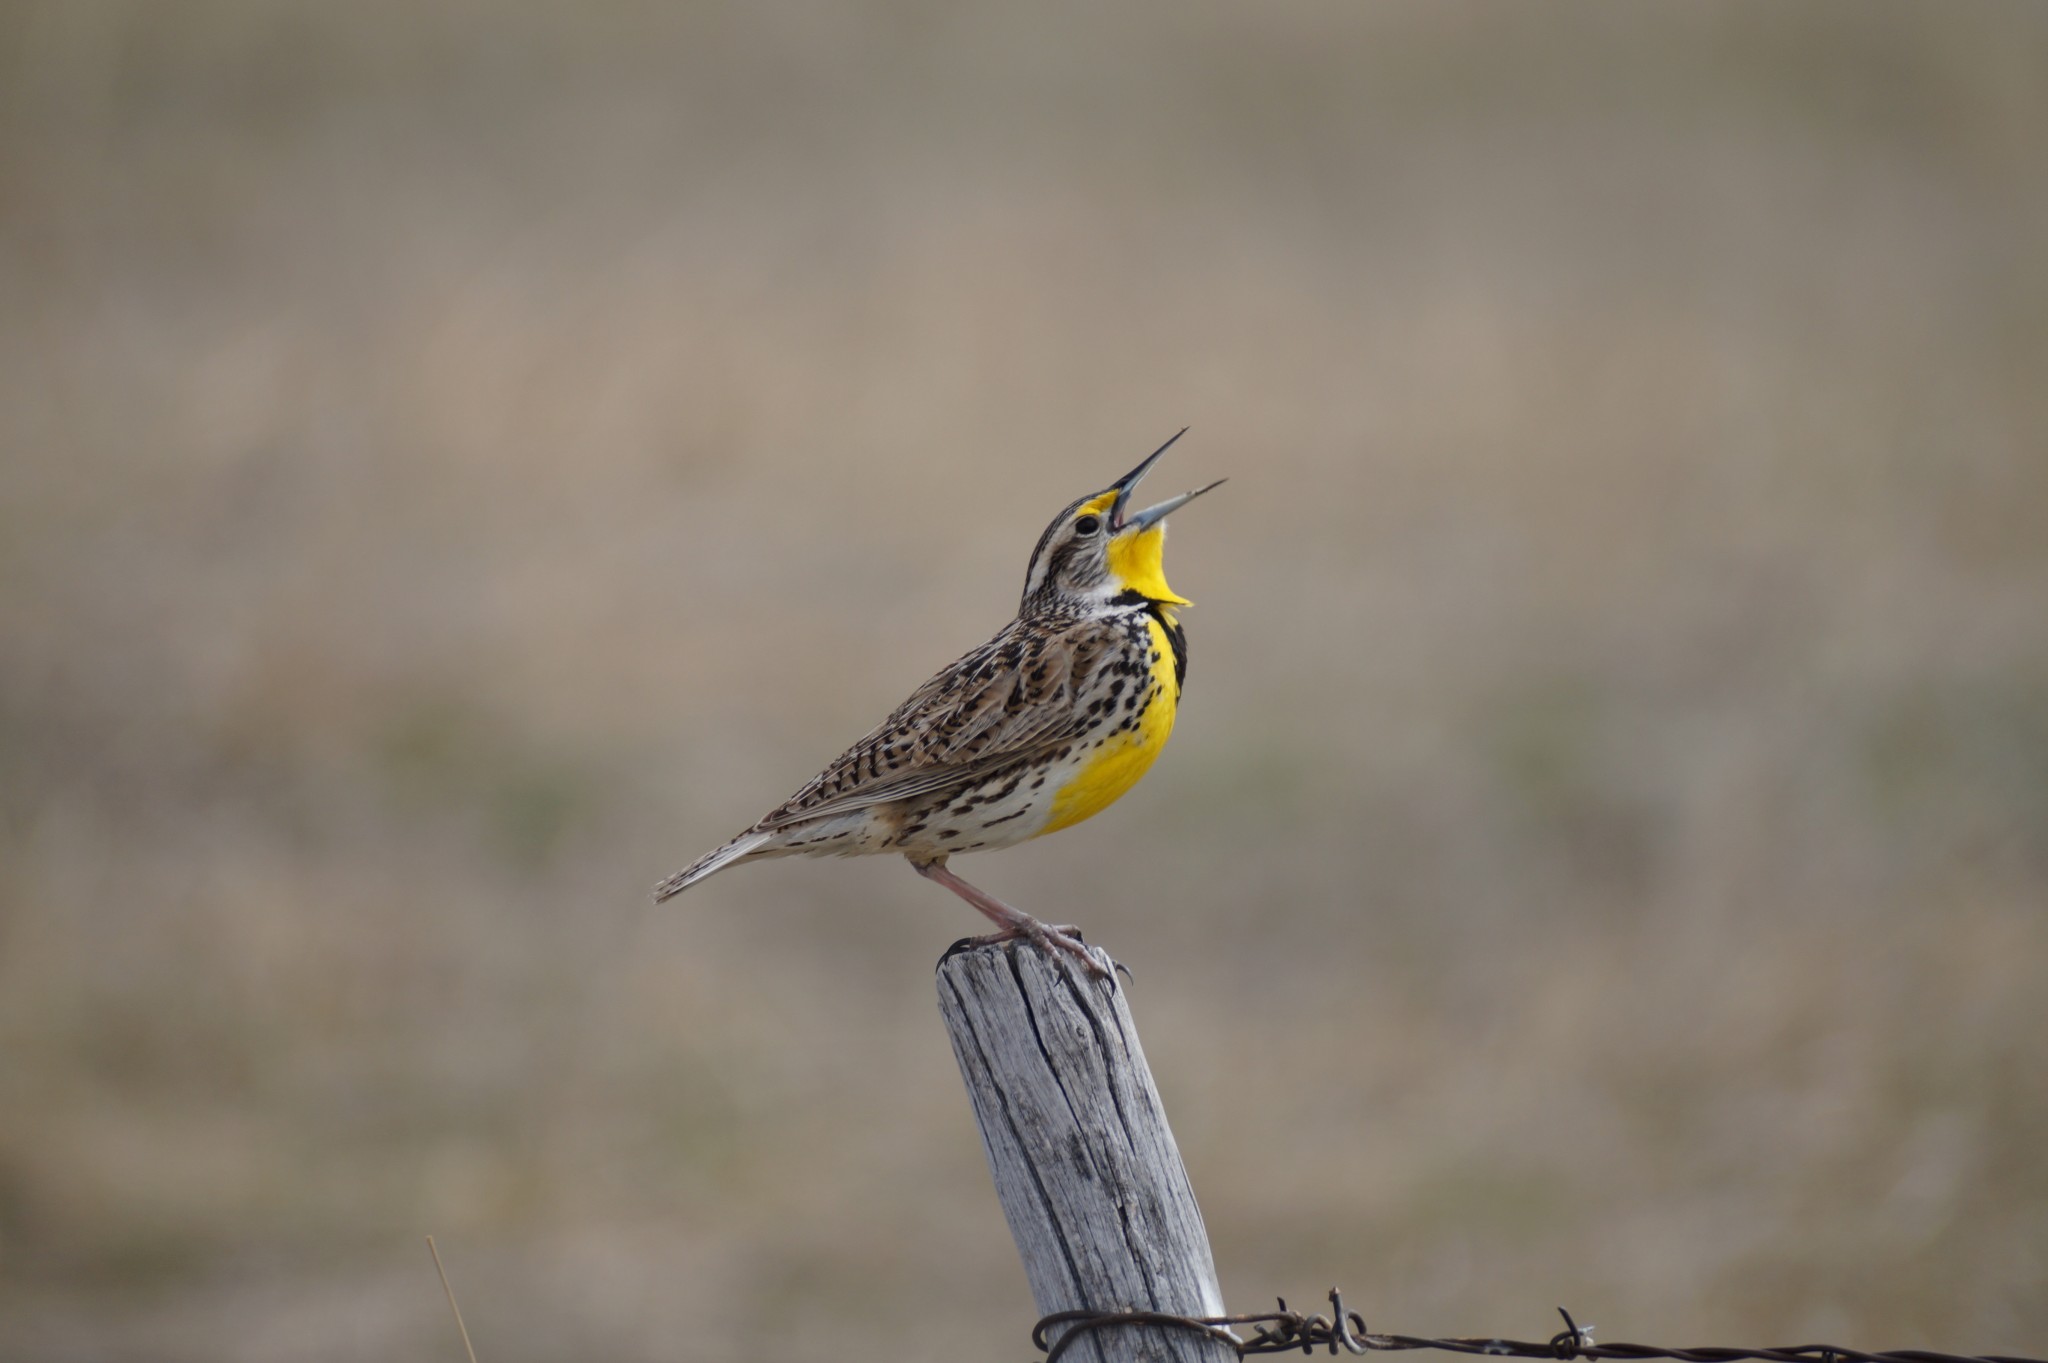 Western Meadowlarks are as common as dirt in the Sandhills. Eastern Meadowlarks can also be found in the wet meadows of the Sandhills.